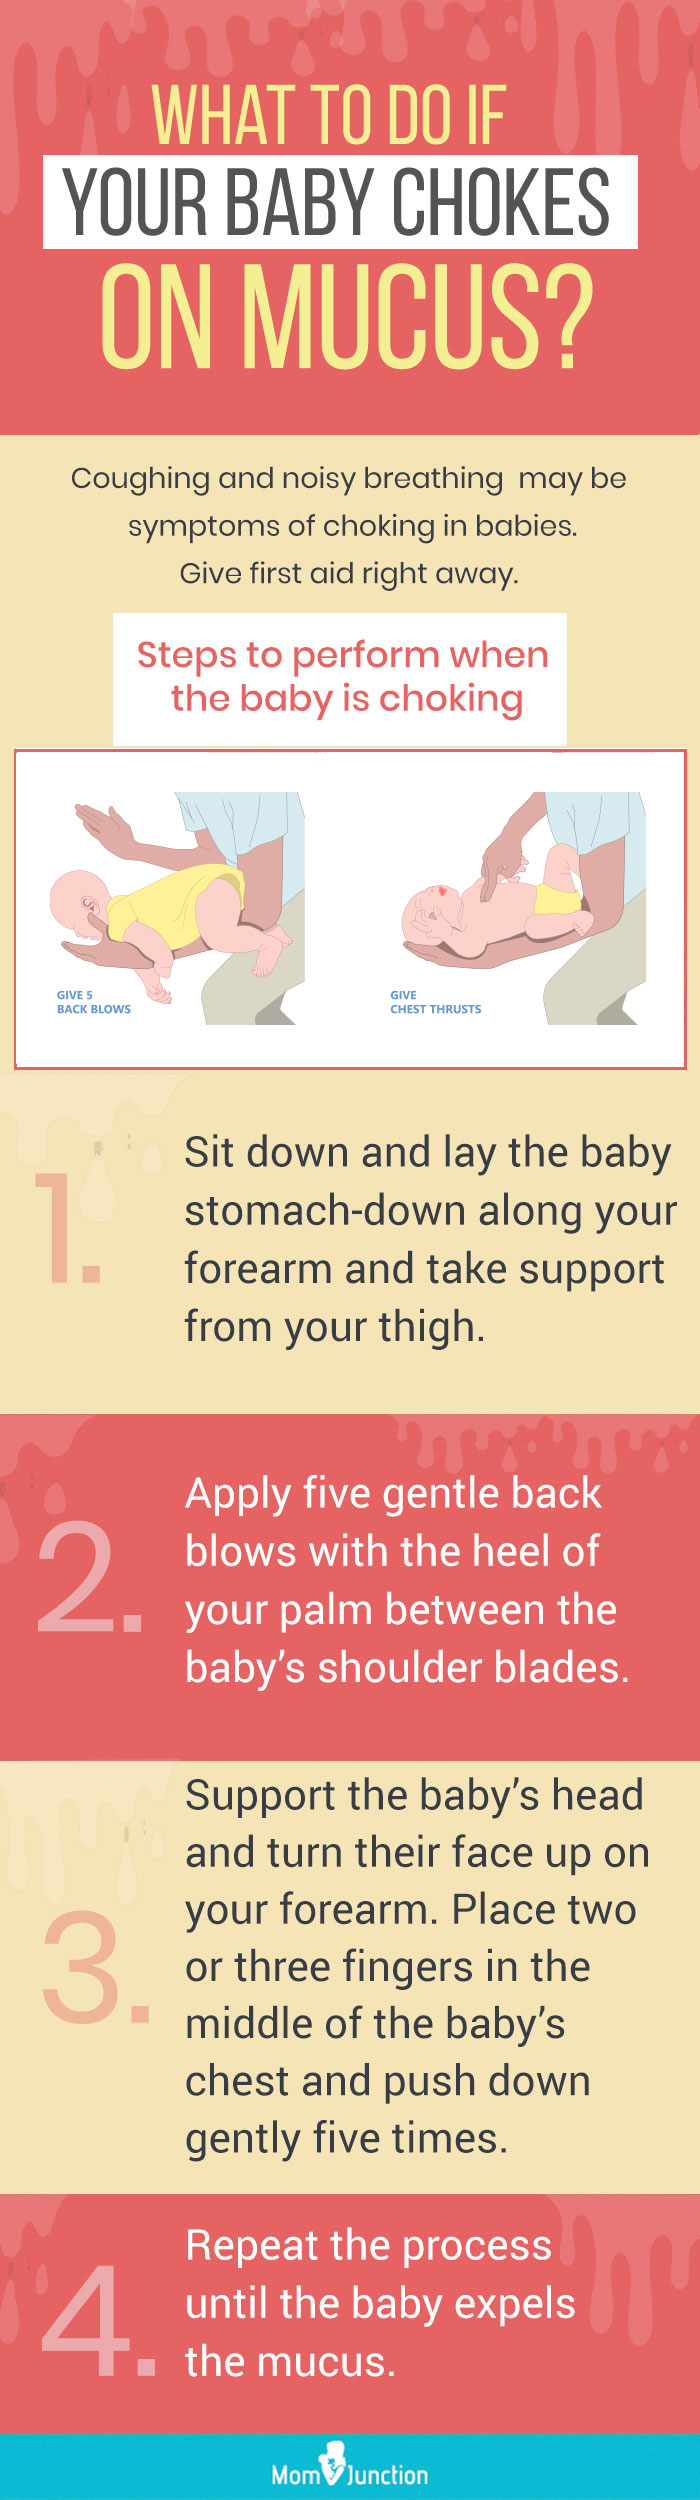 what to do if your baby chokes on mucus (infographic)